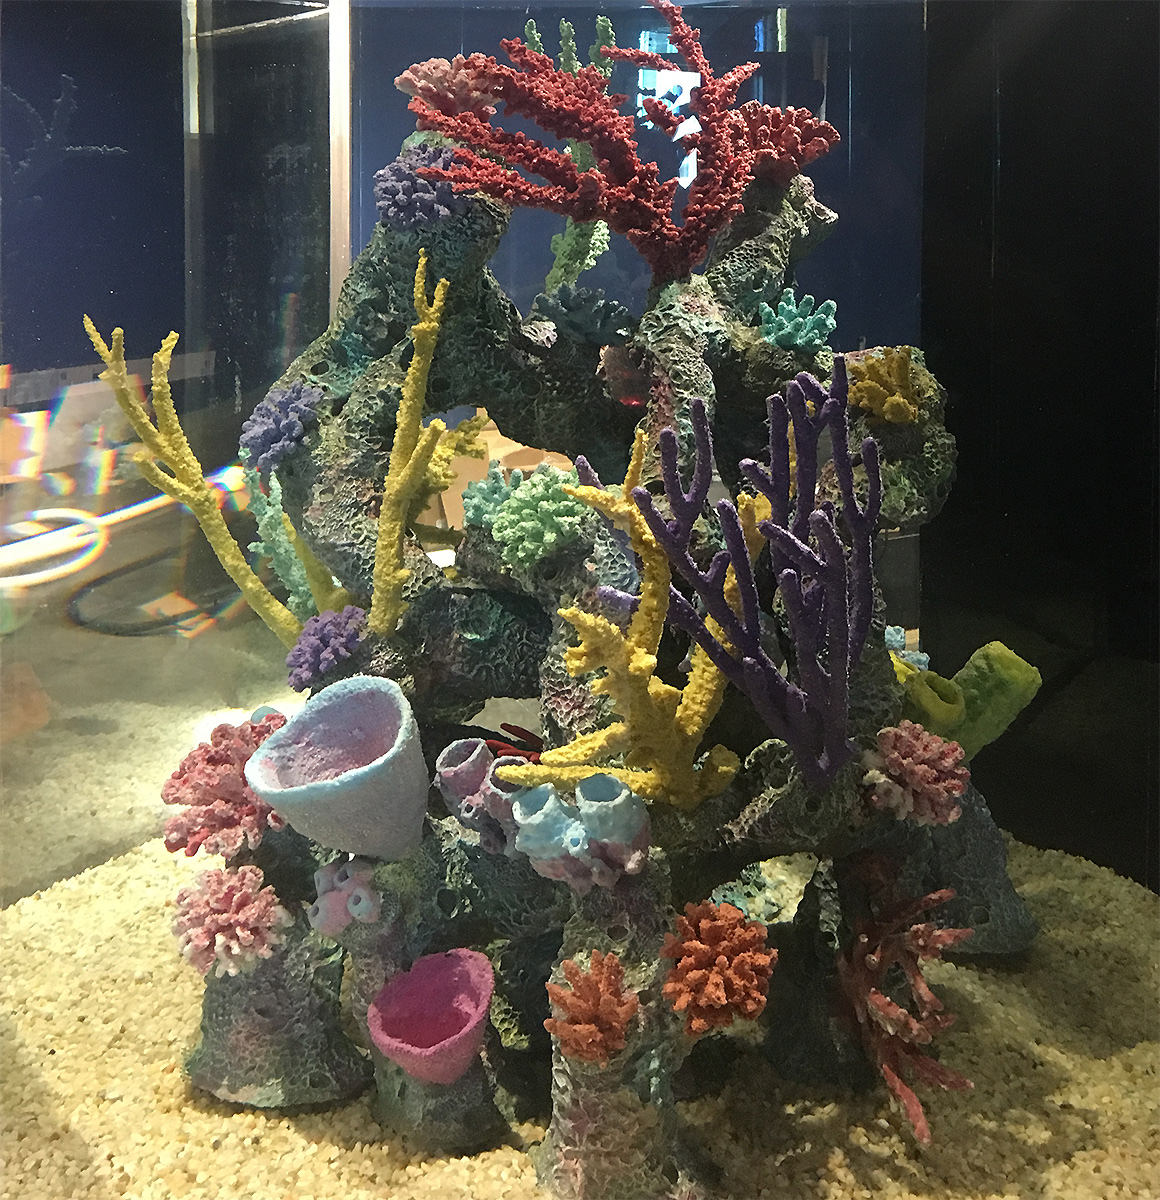 The Dauphin Sea Lab is one of the most interesting science museums in the entire state, to help show and teach the public the state’s marine programs. 